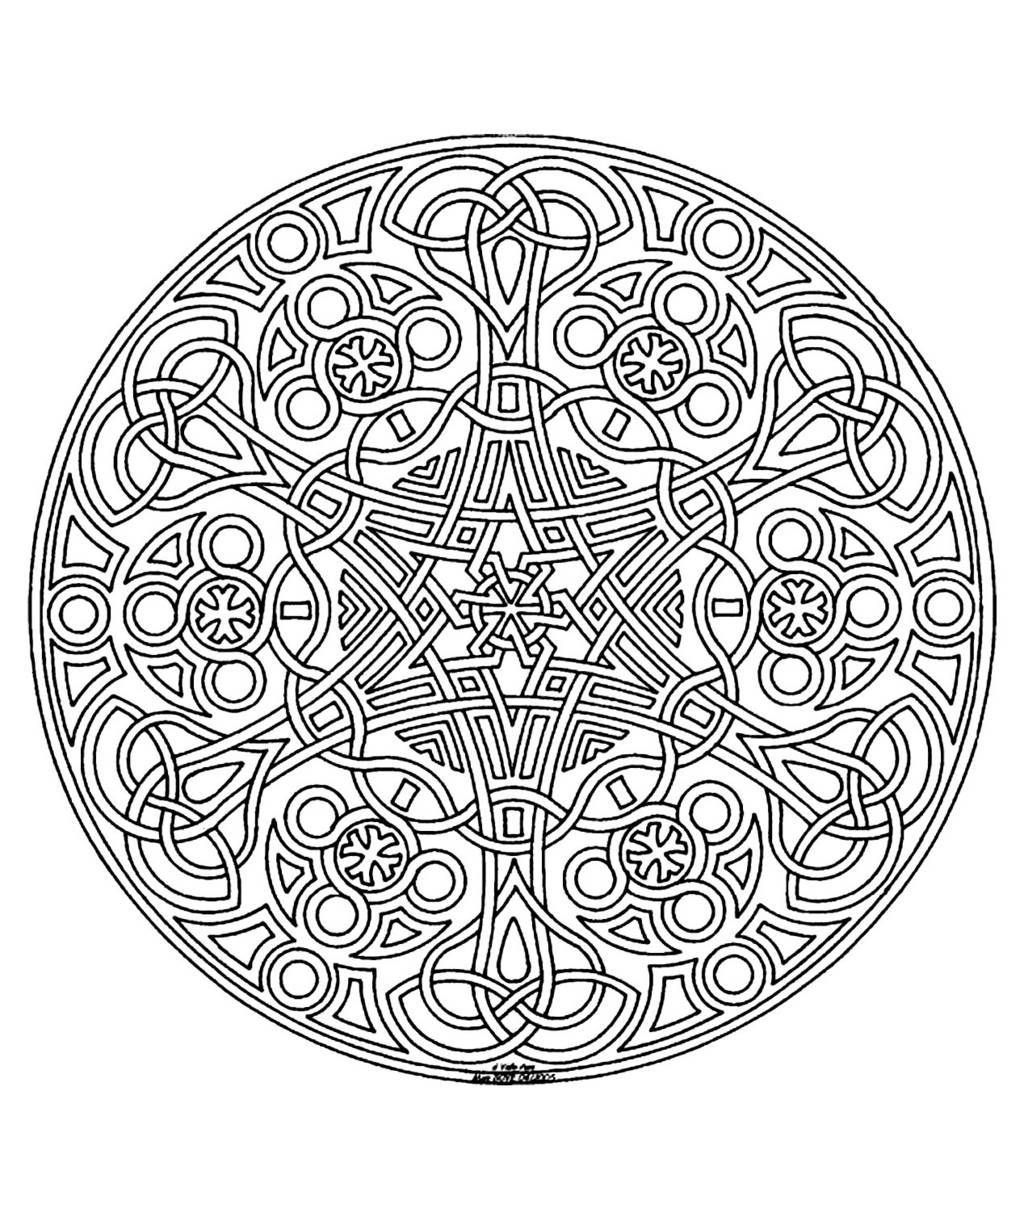 Free Mandala Difficult Adult To Print 20 Coloring Pages   Coloring ...